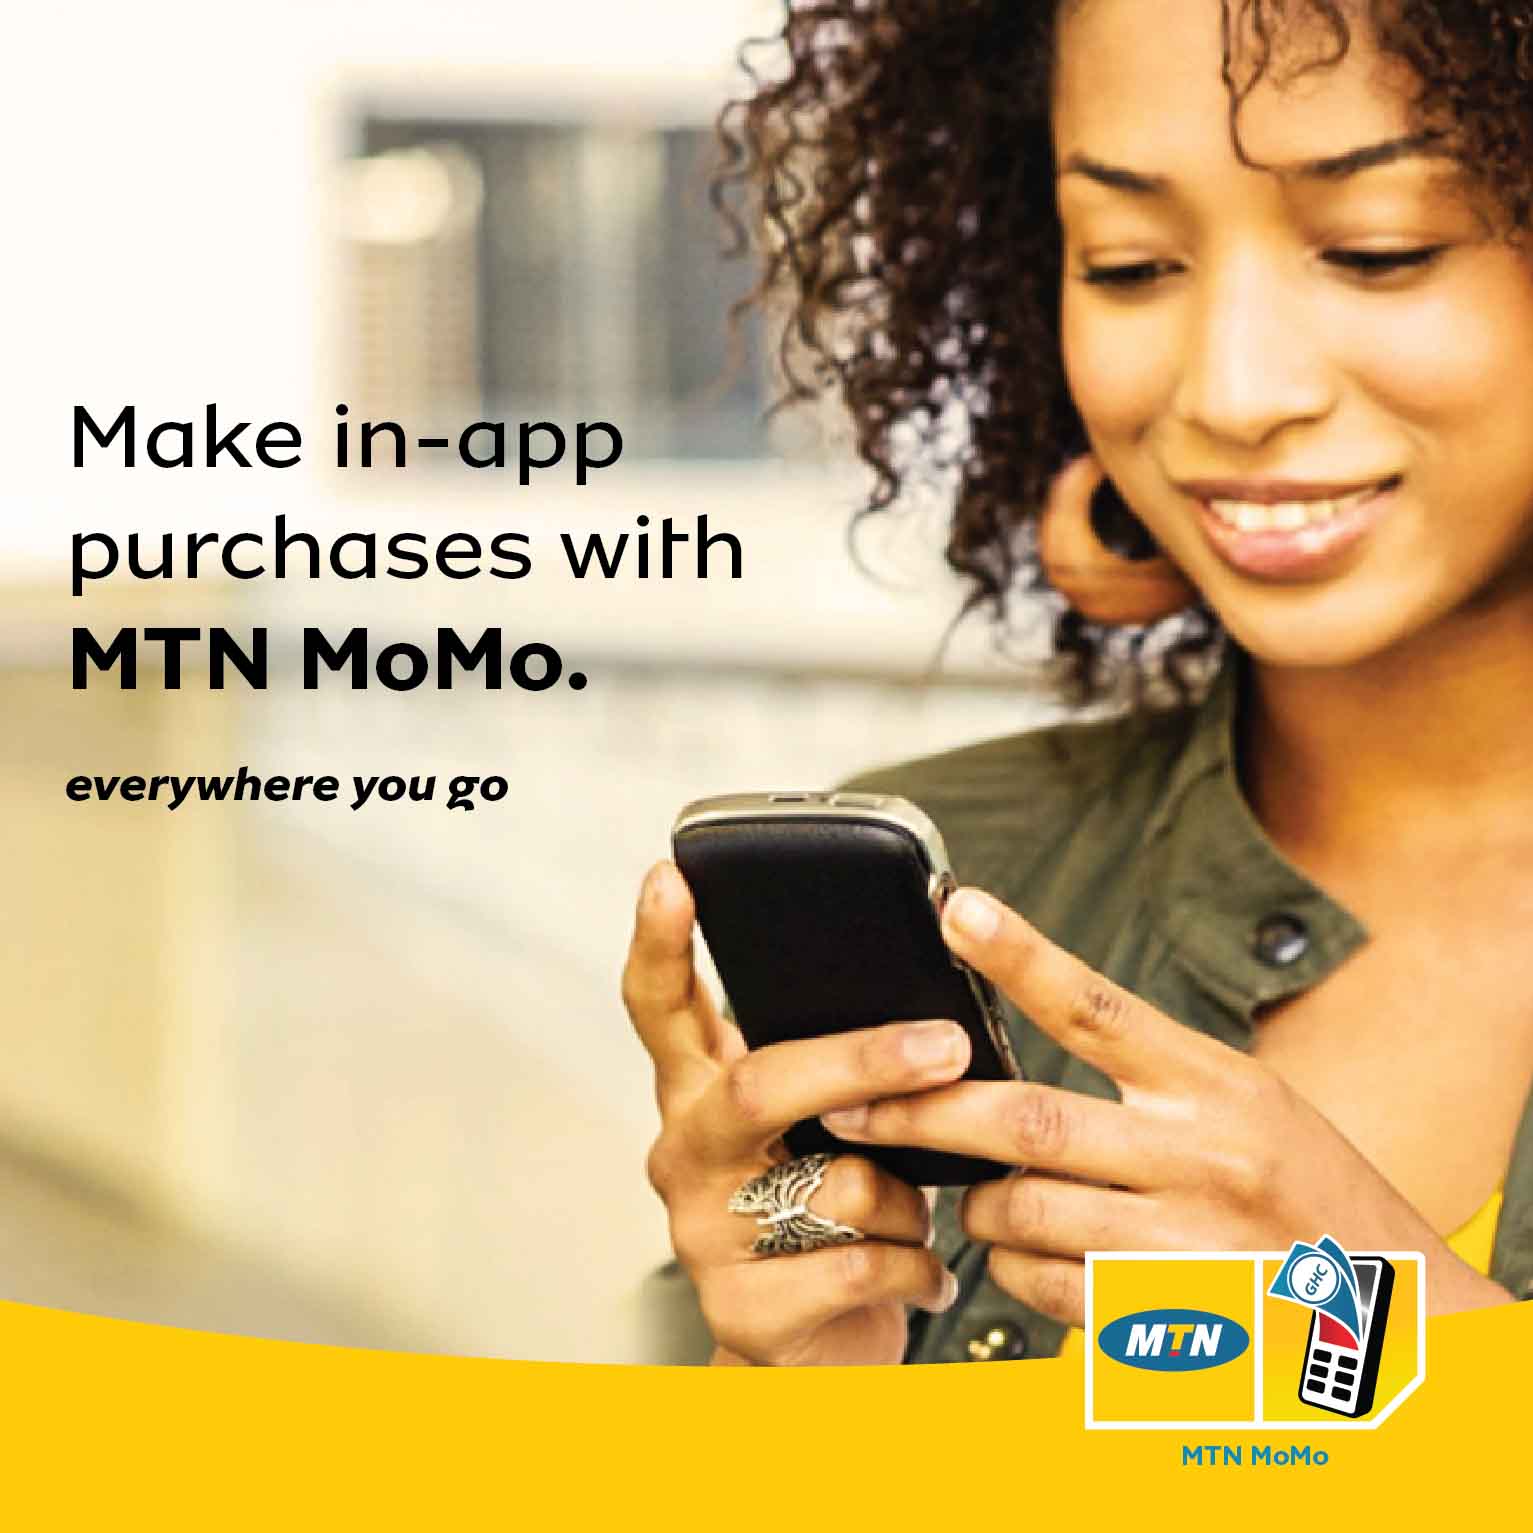 How To Use Mtn Mobile Money To Buy Apps On Google Play Store - 